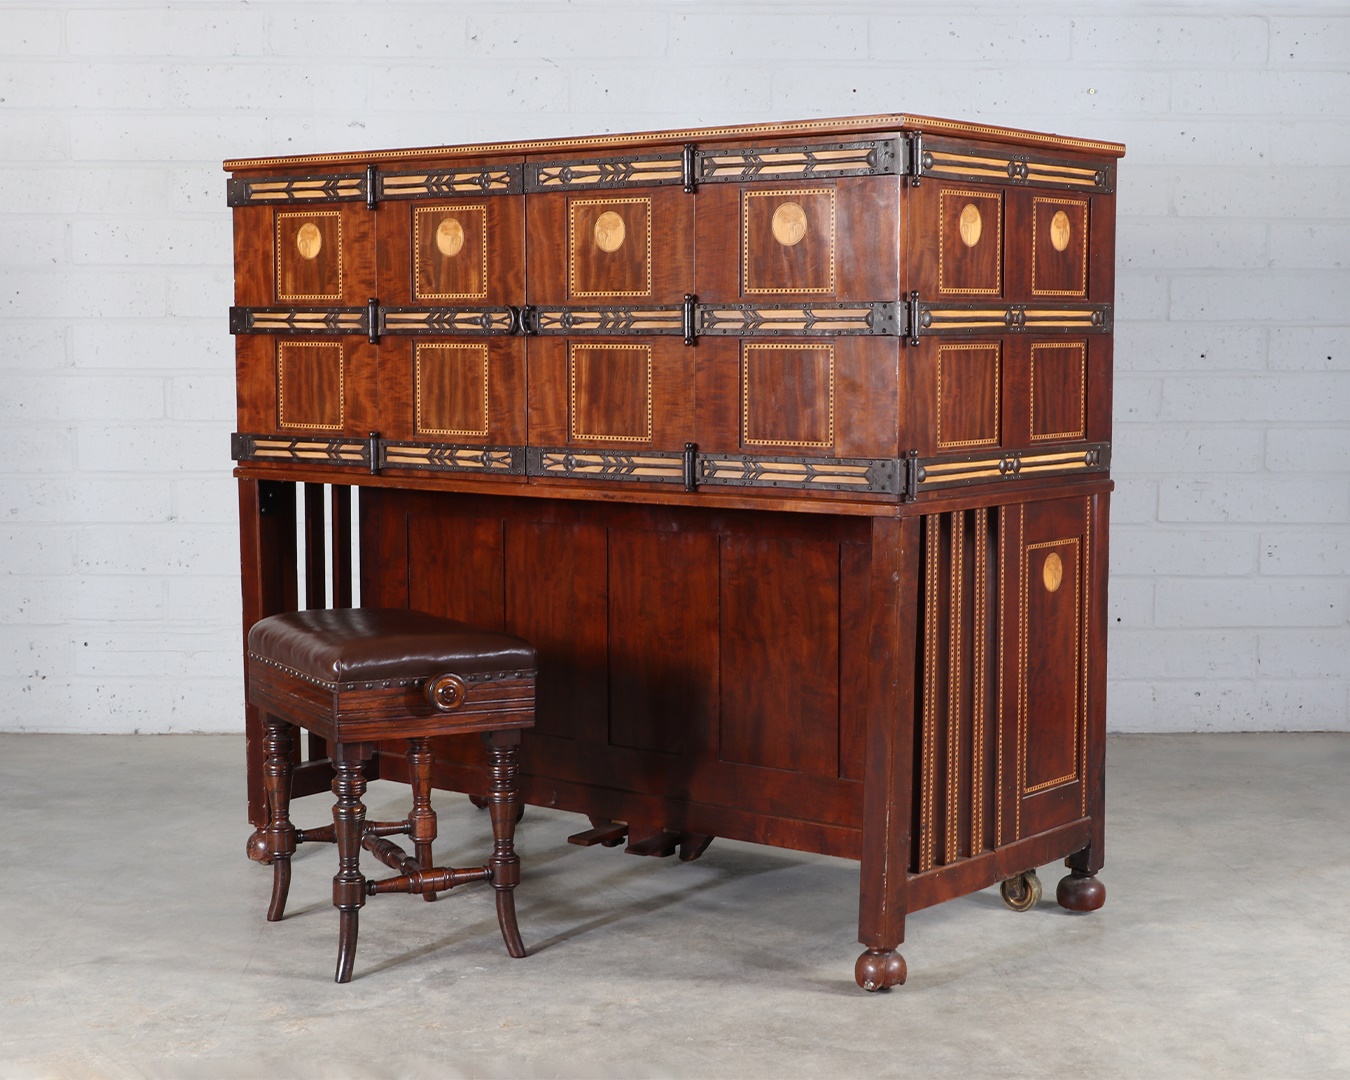 An upright Broadwood piano, as designed by Charles Robert Ashbee (1863-1942)